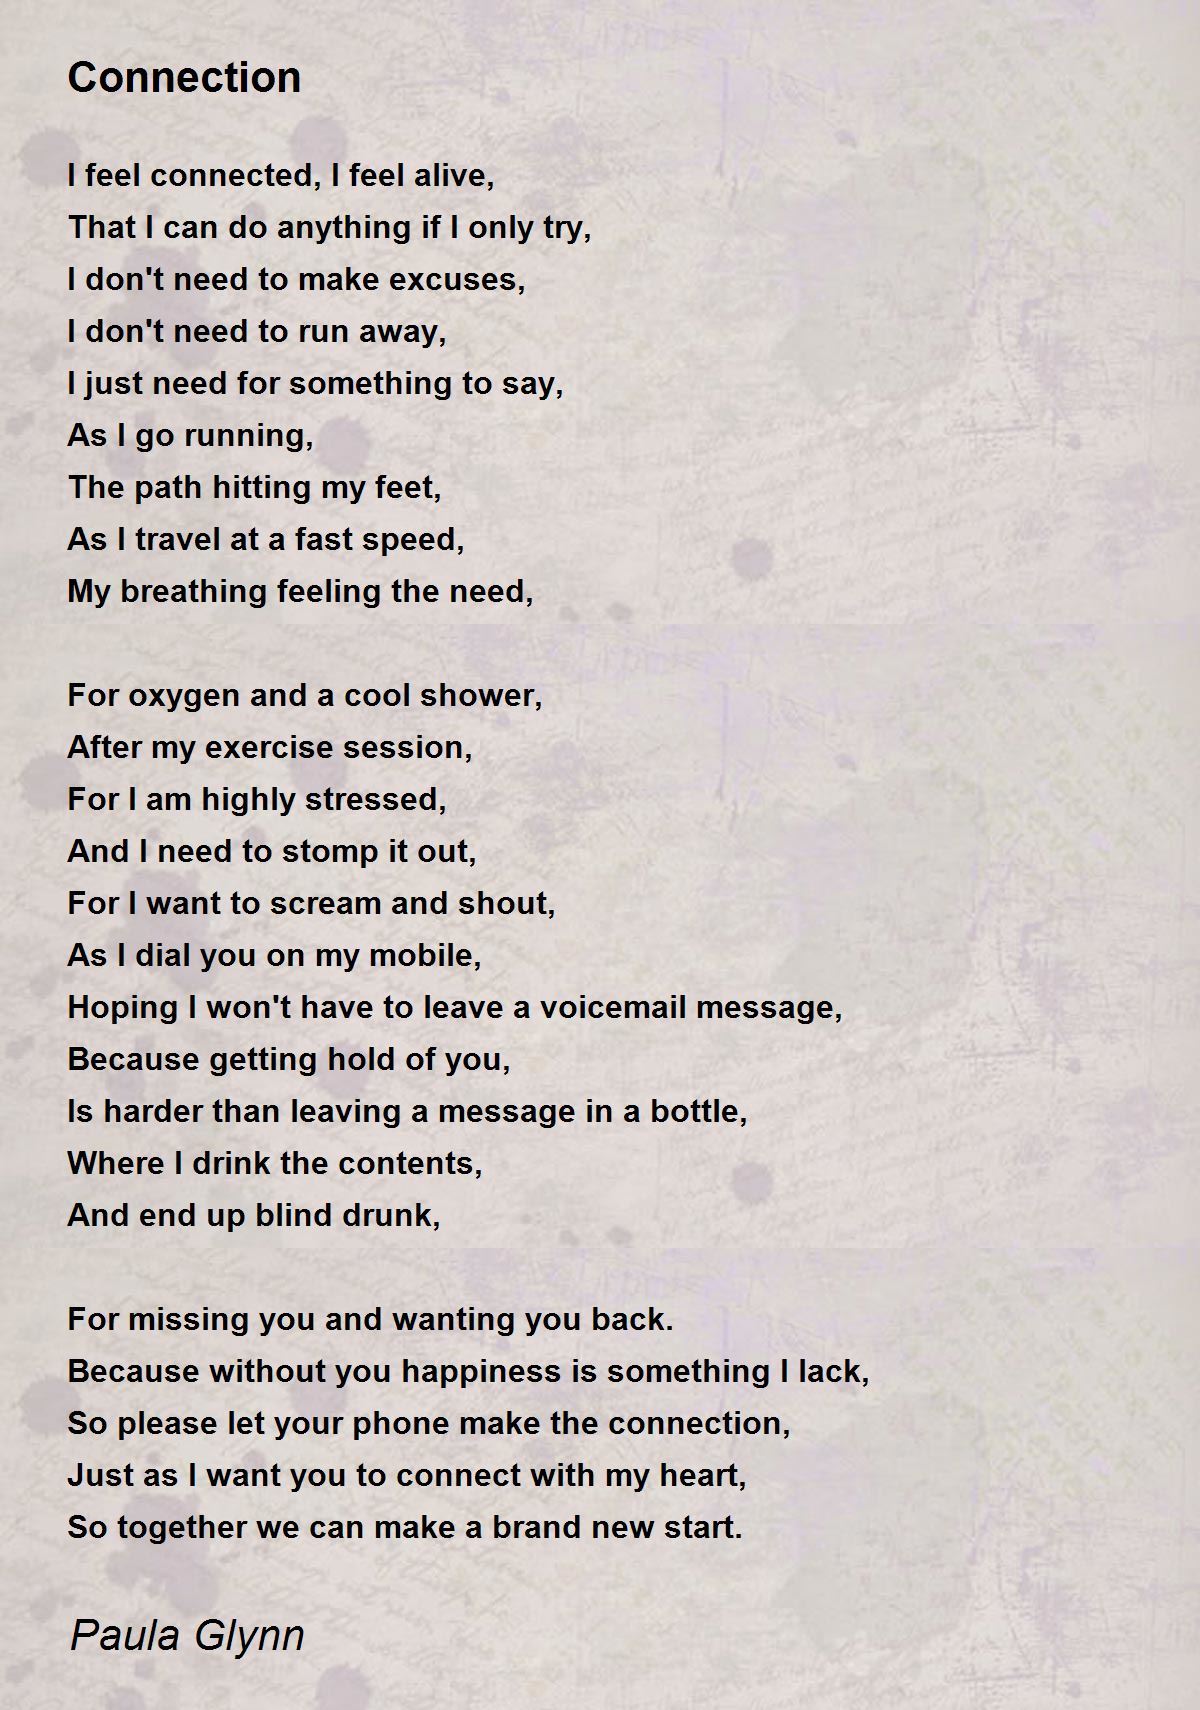 Connection - Connection Poem by Paula Glynn